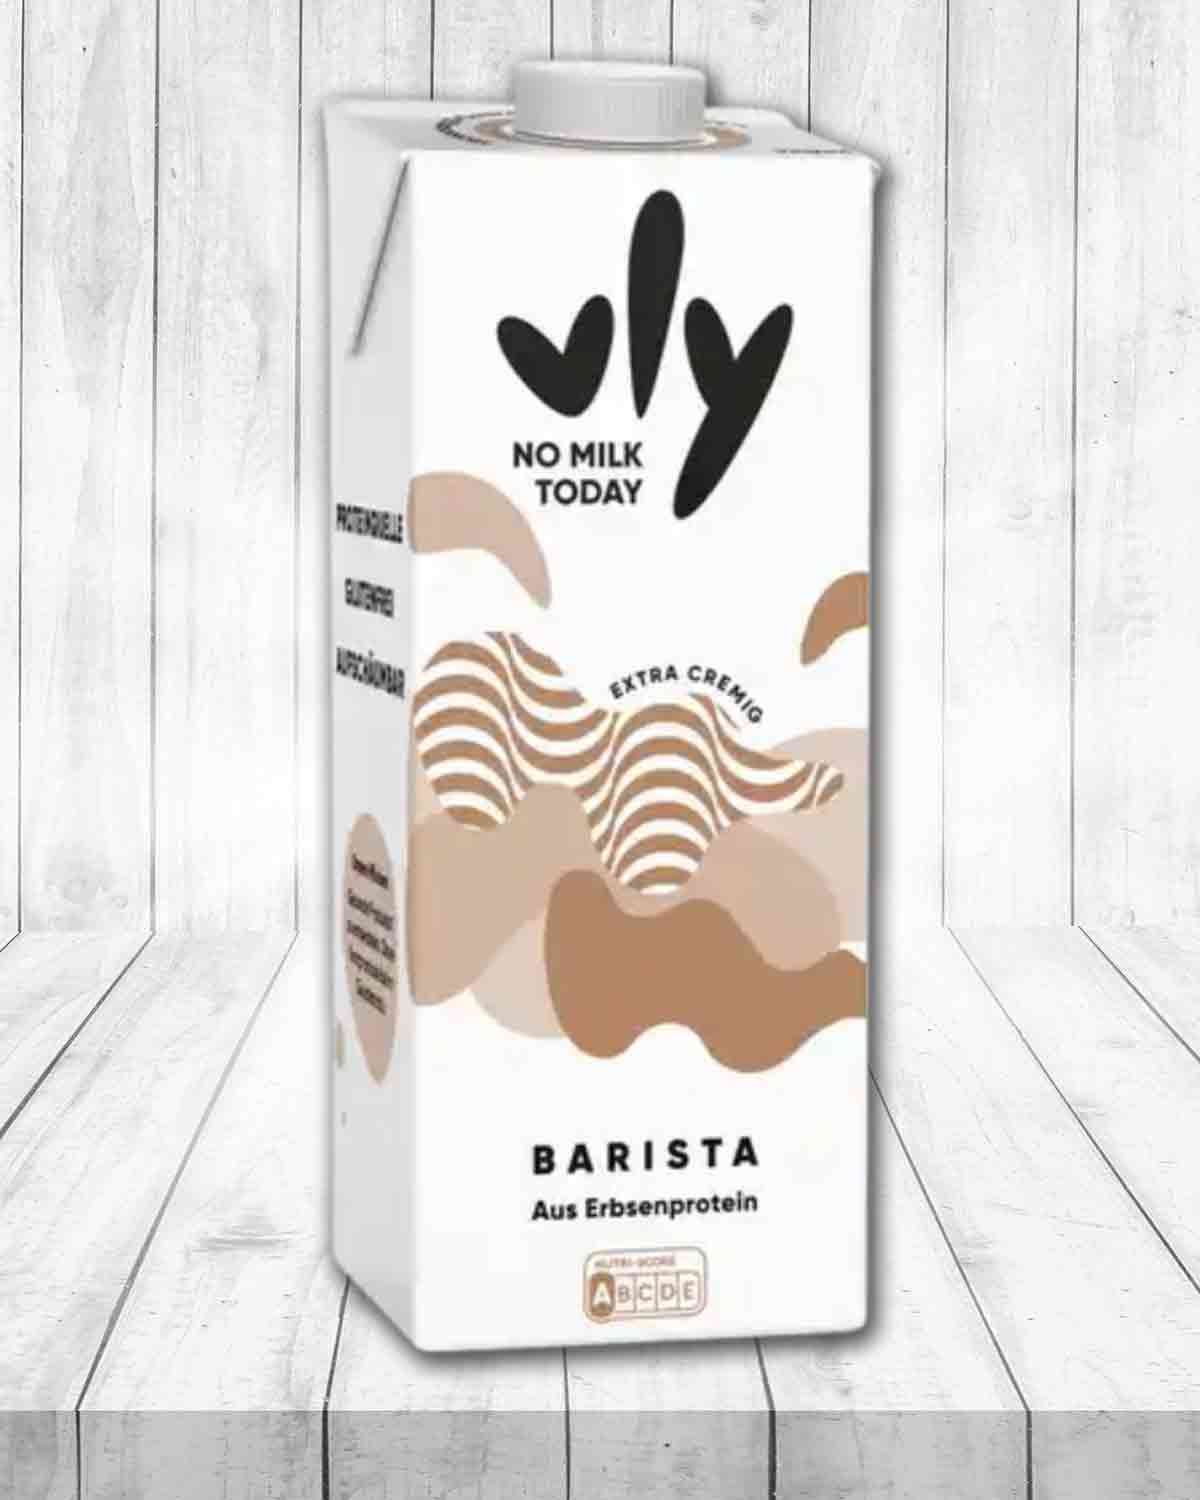 vly Barista Milch